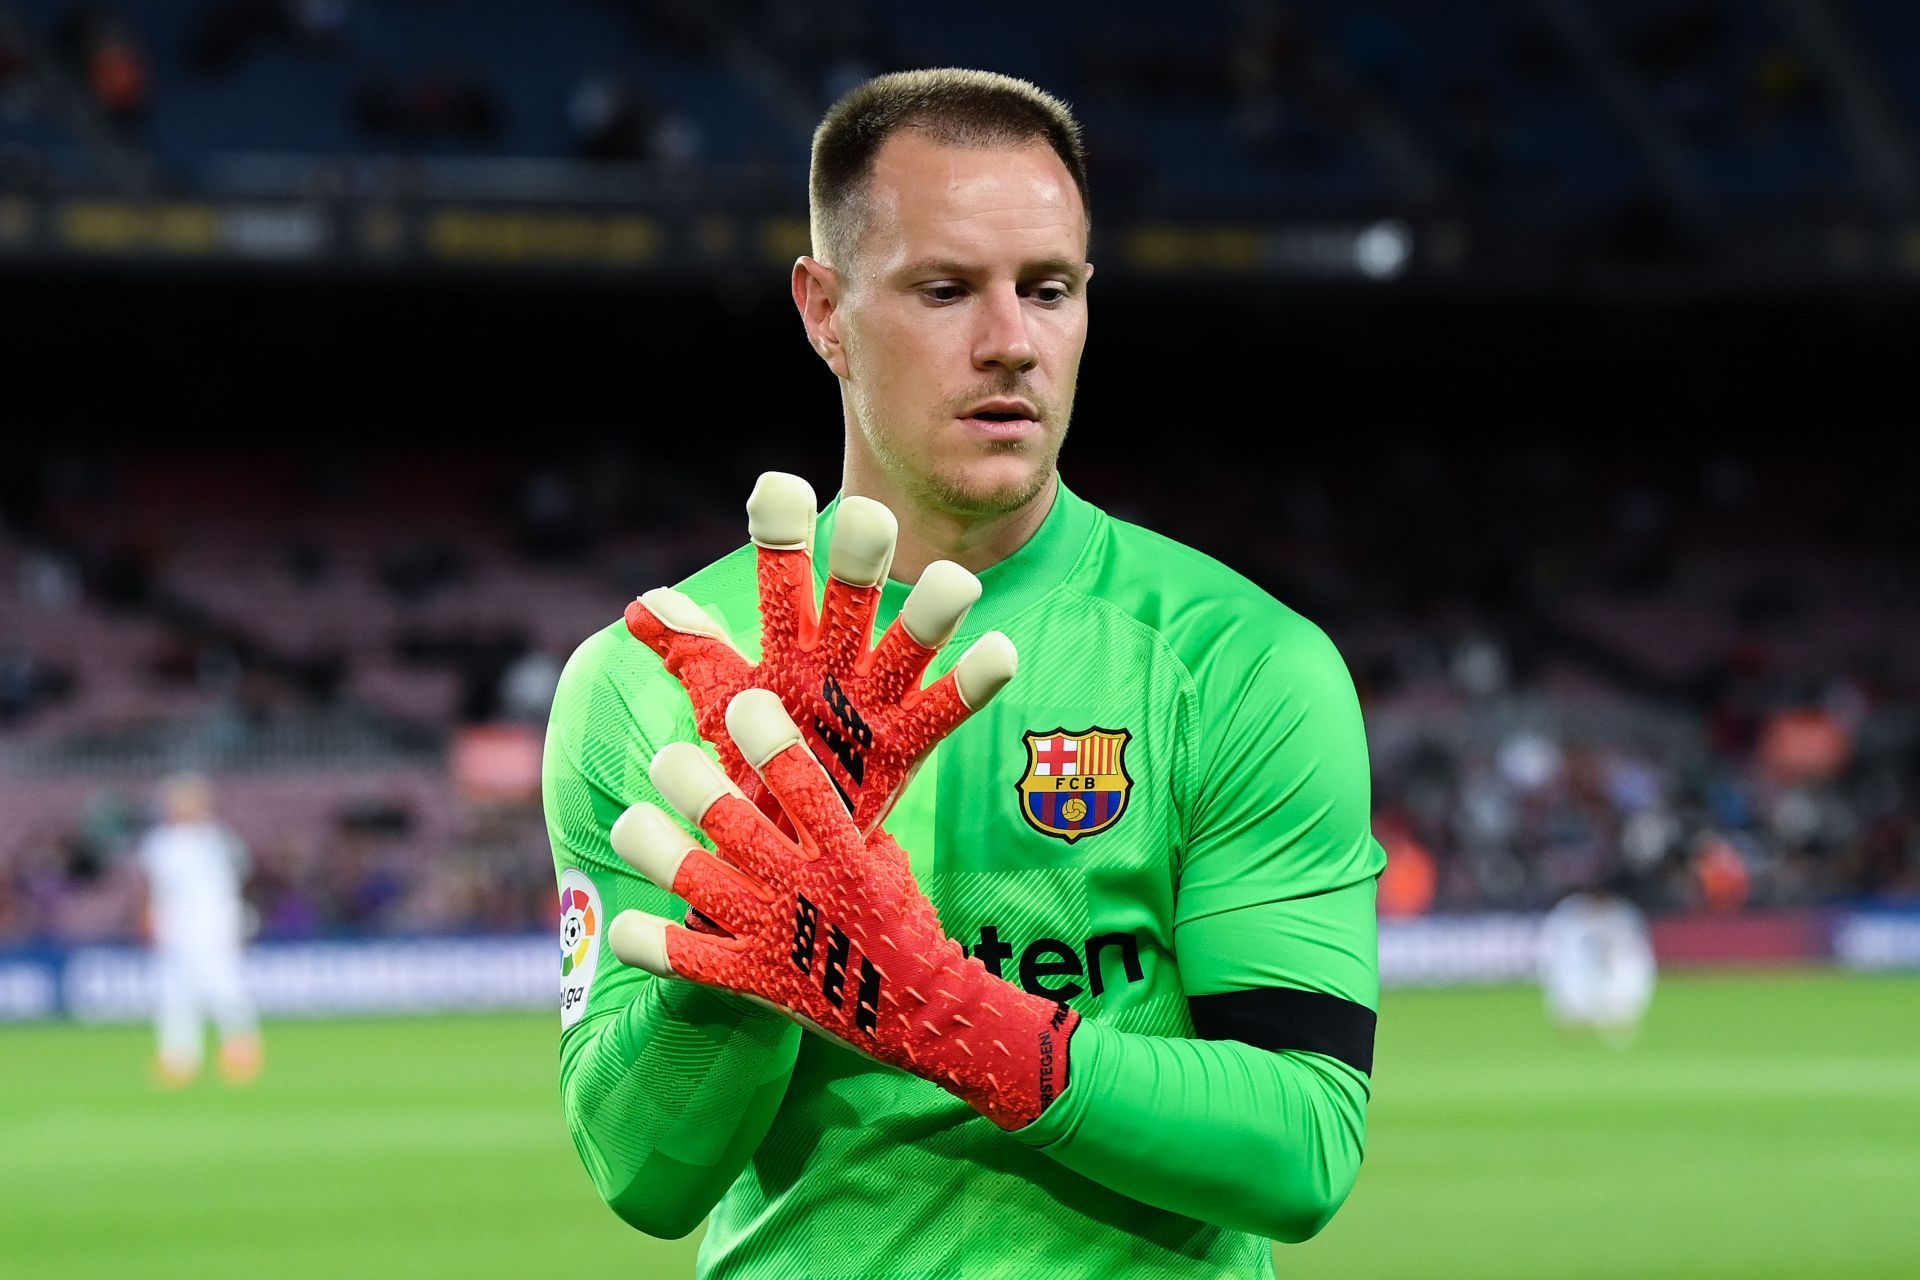 Marc-Andre ter Stegen has been a key player for Barcelona.